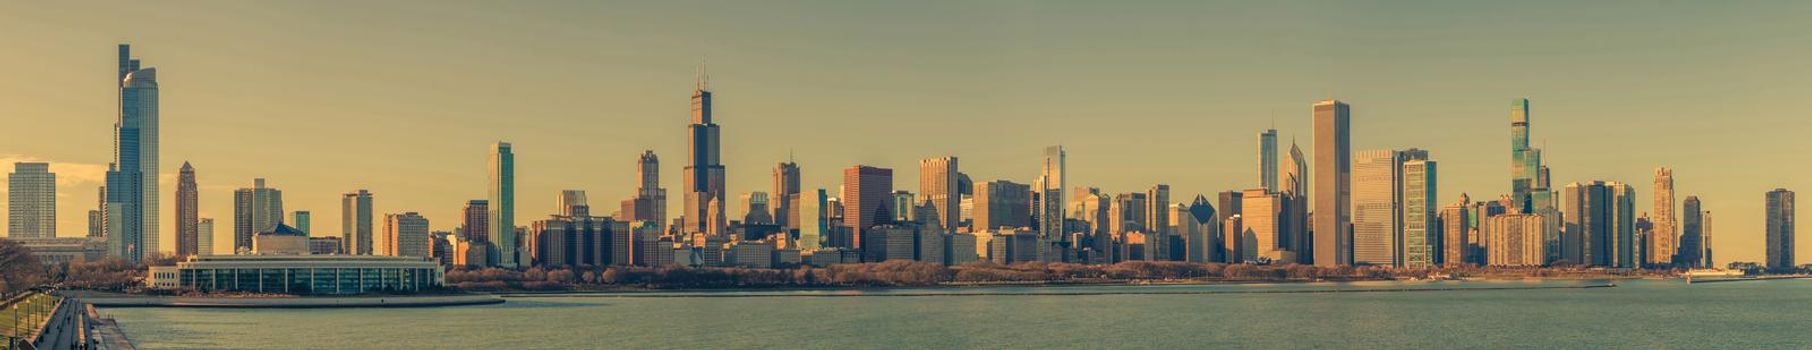 Ultra Wide Panoramic Skyline of Chicago Downtown Illinois, United States of America. 